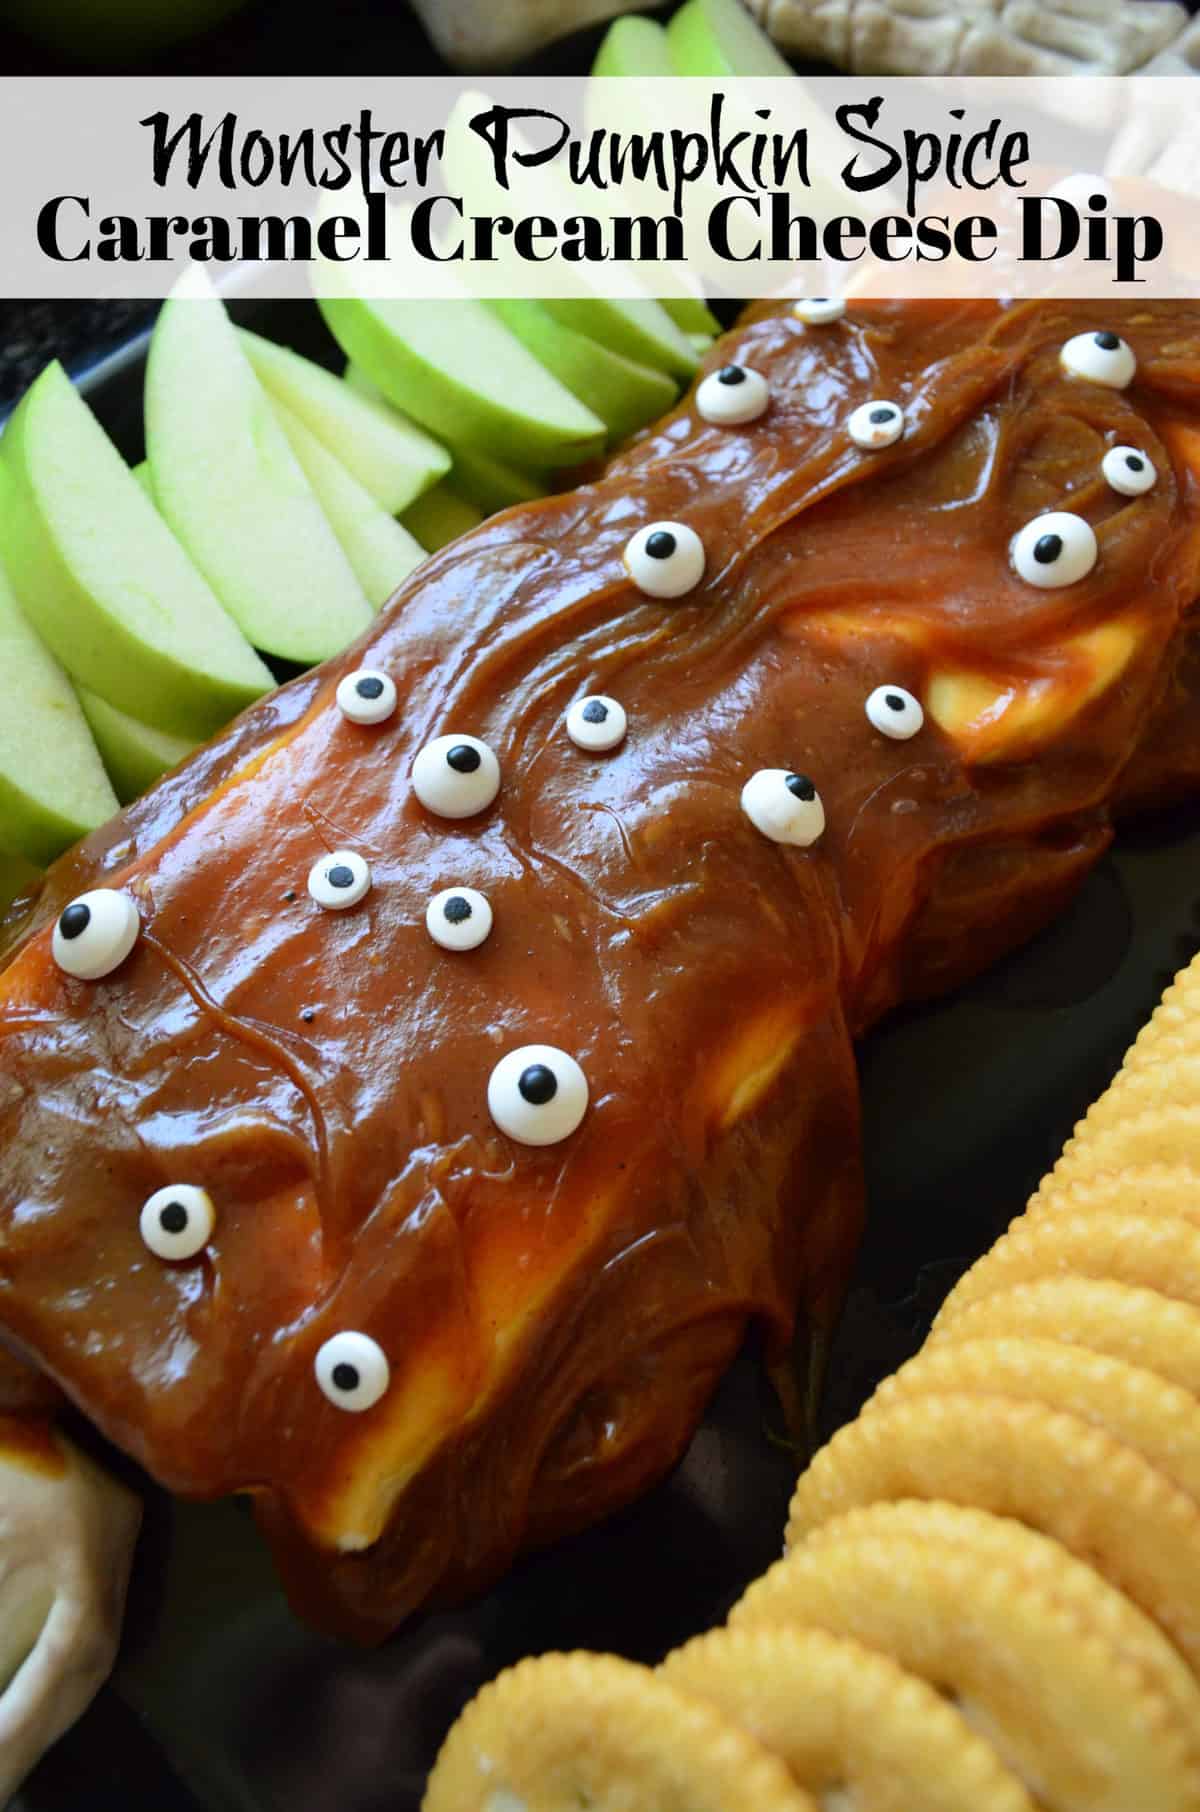 rectangle of cream cheese covered in caramel and candy eyes served with apples and crackers. Title text.